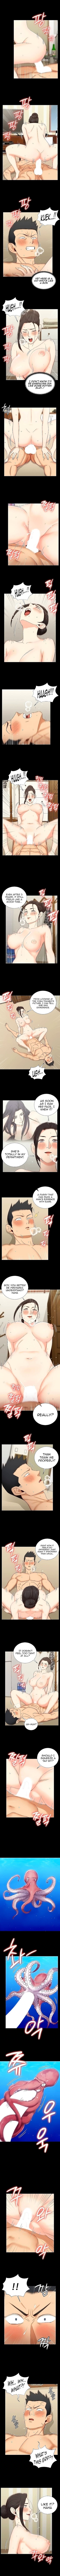 That Man's Room - Page 3